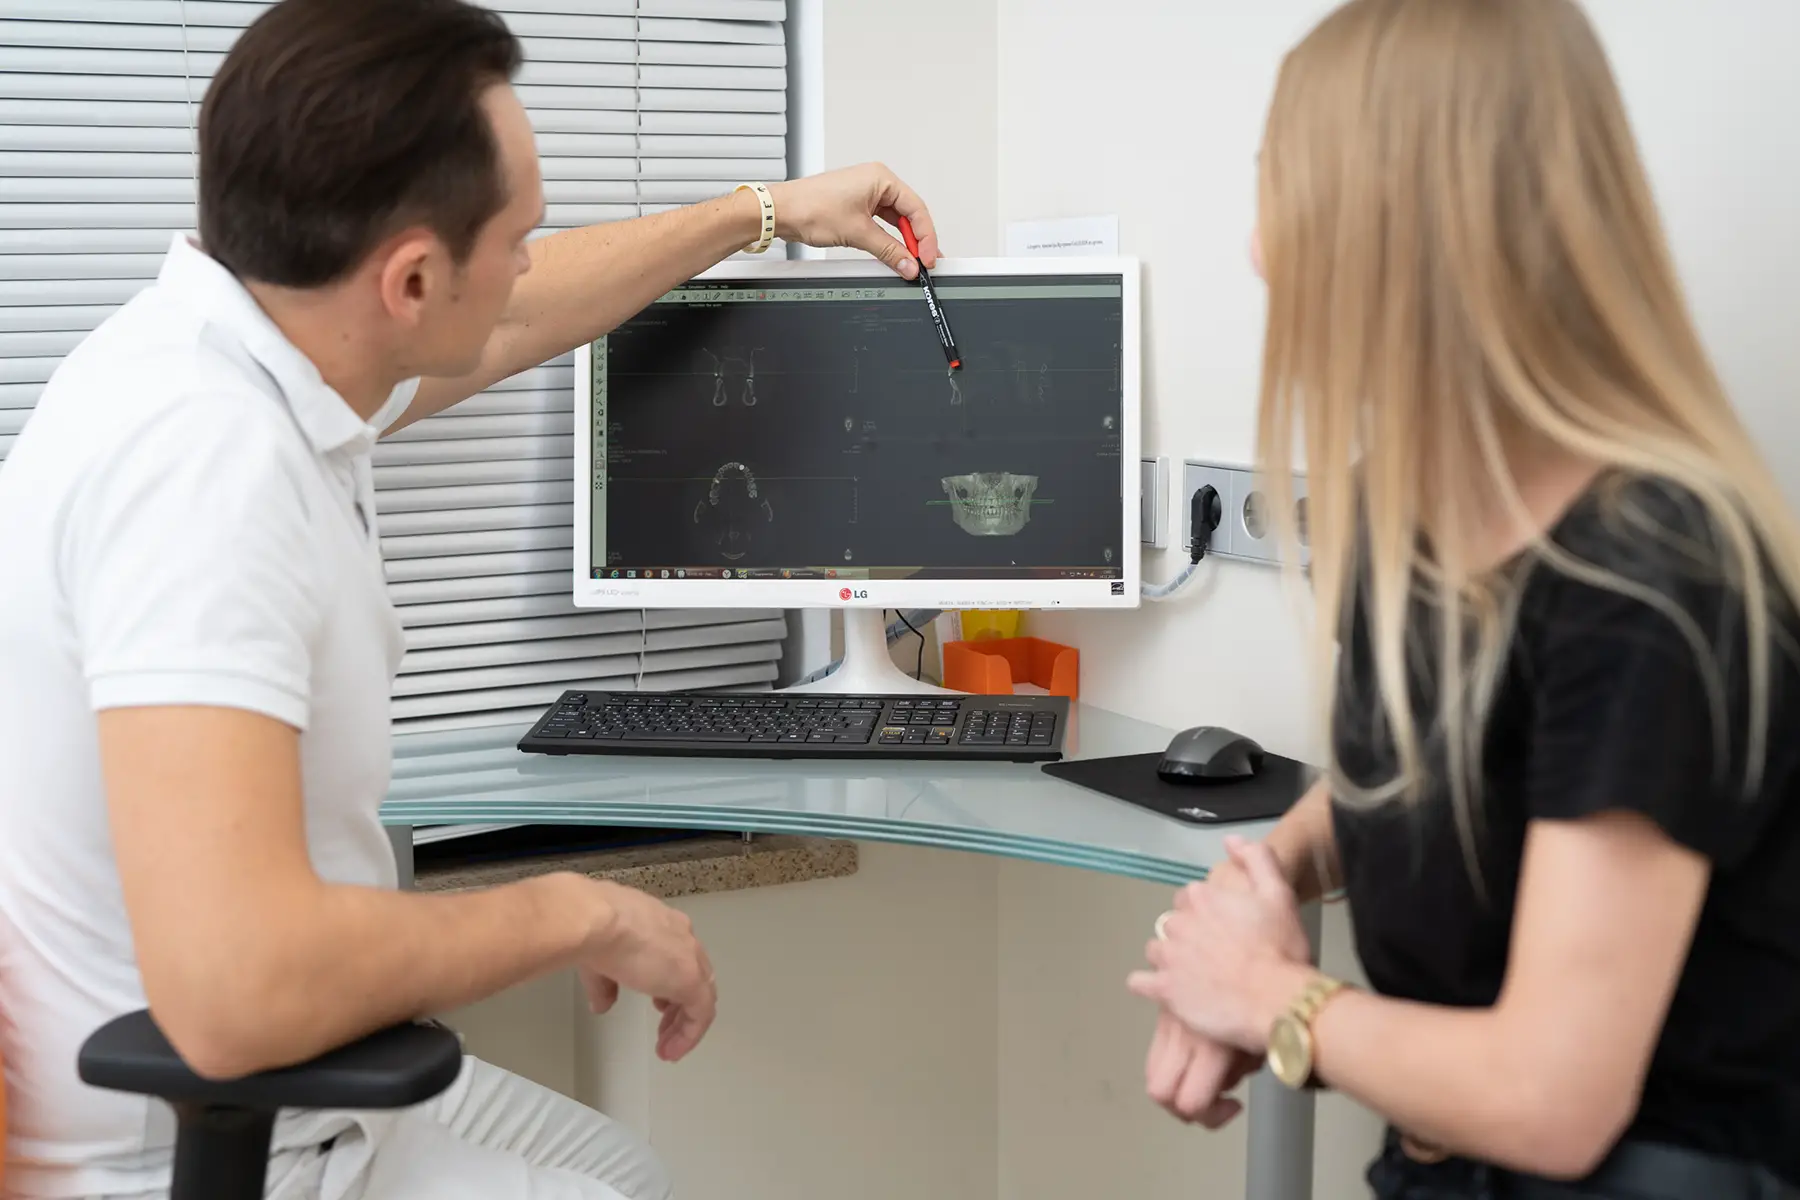 Dentist and patient looking at a computer screen